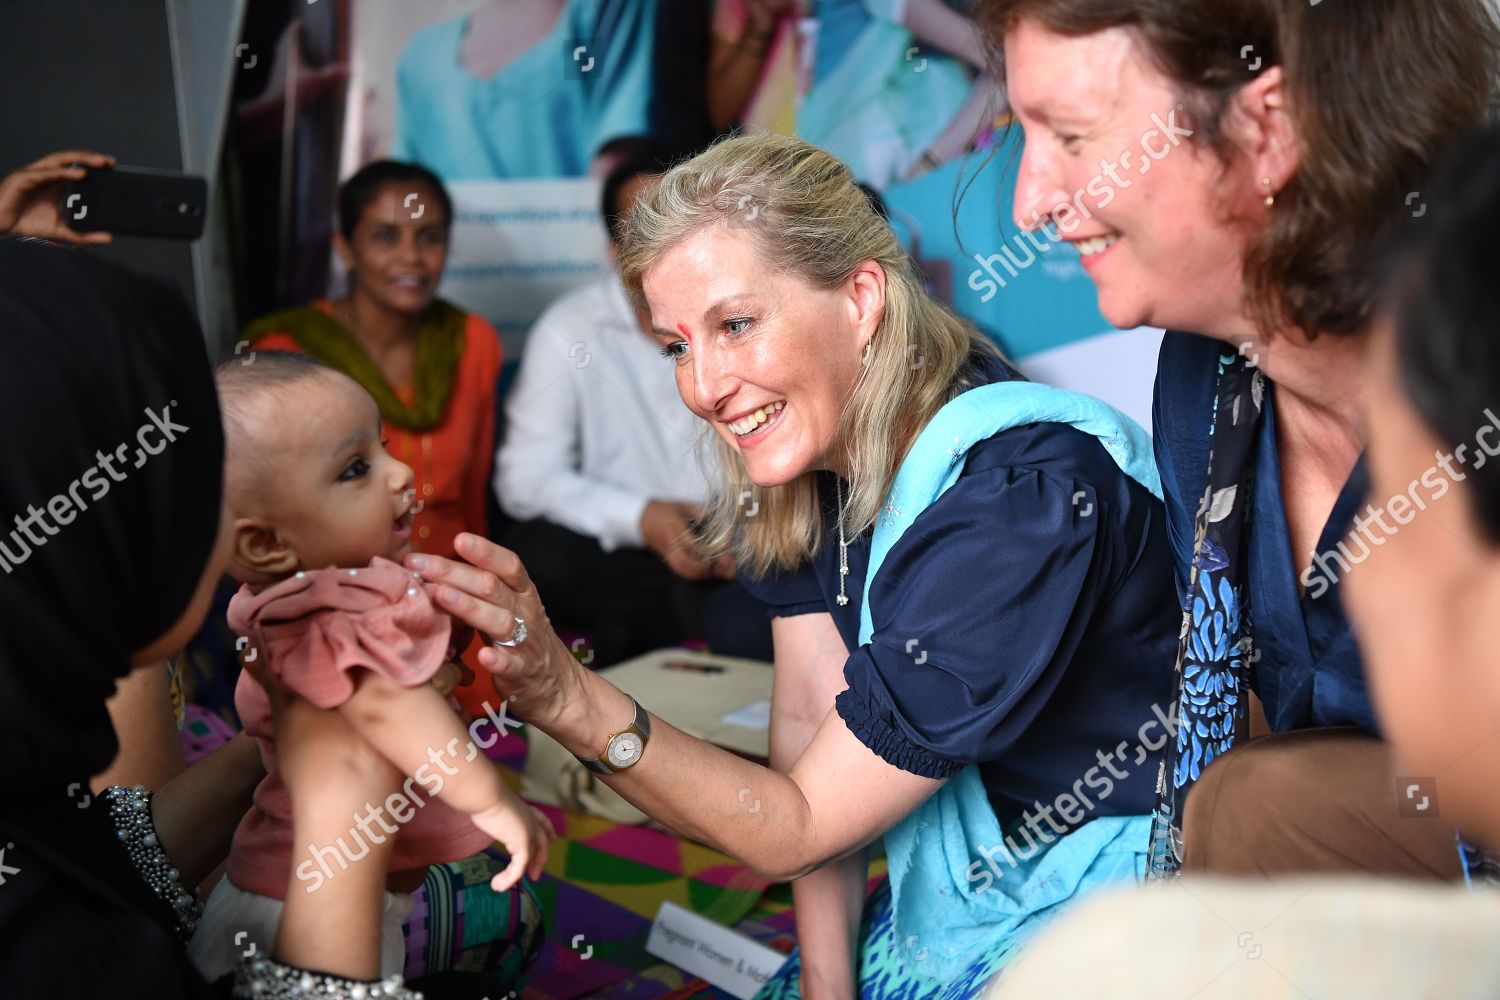 sophie-countess-of-wessex-visit-to-india-shutterstock-editorial-10223982co.jpg